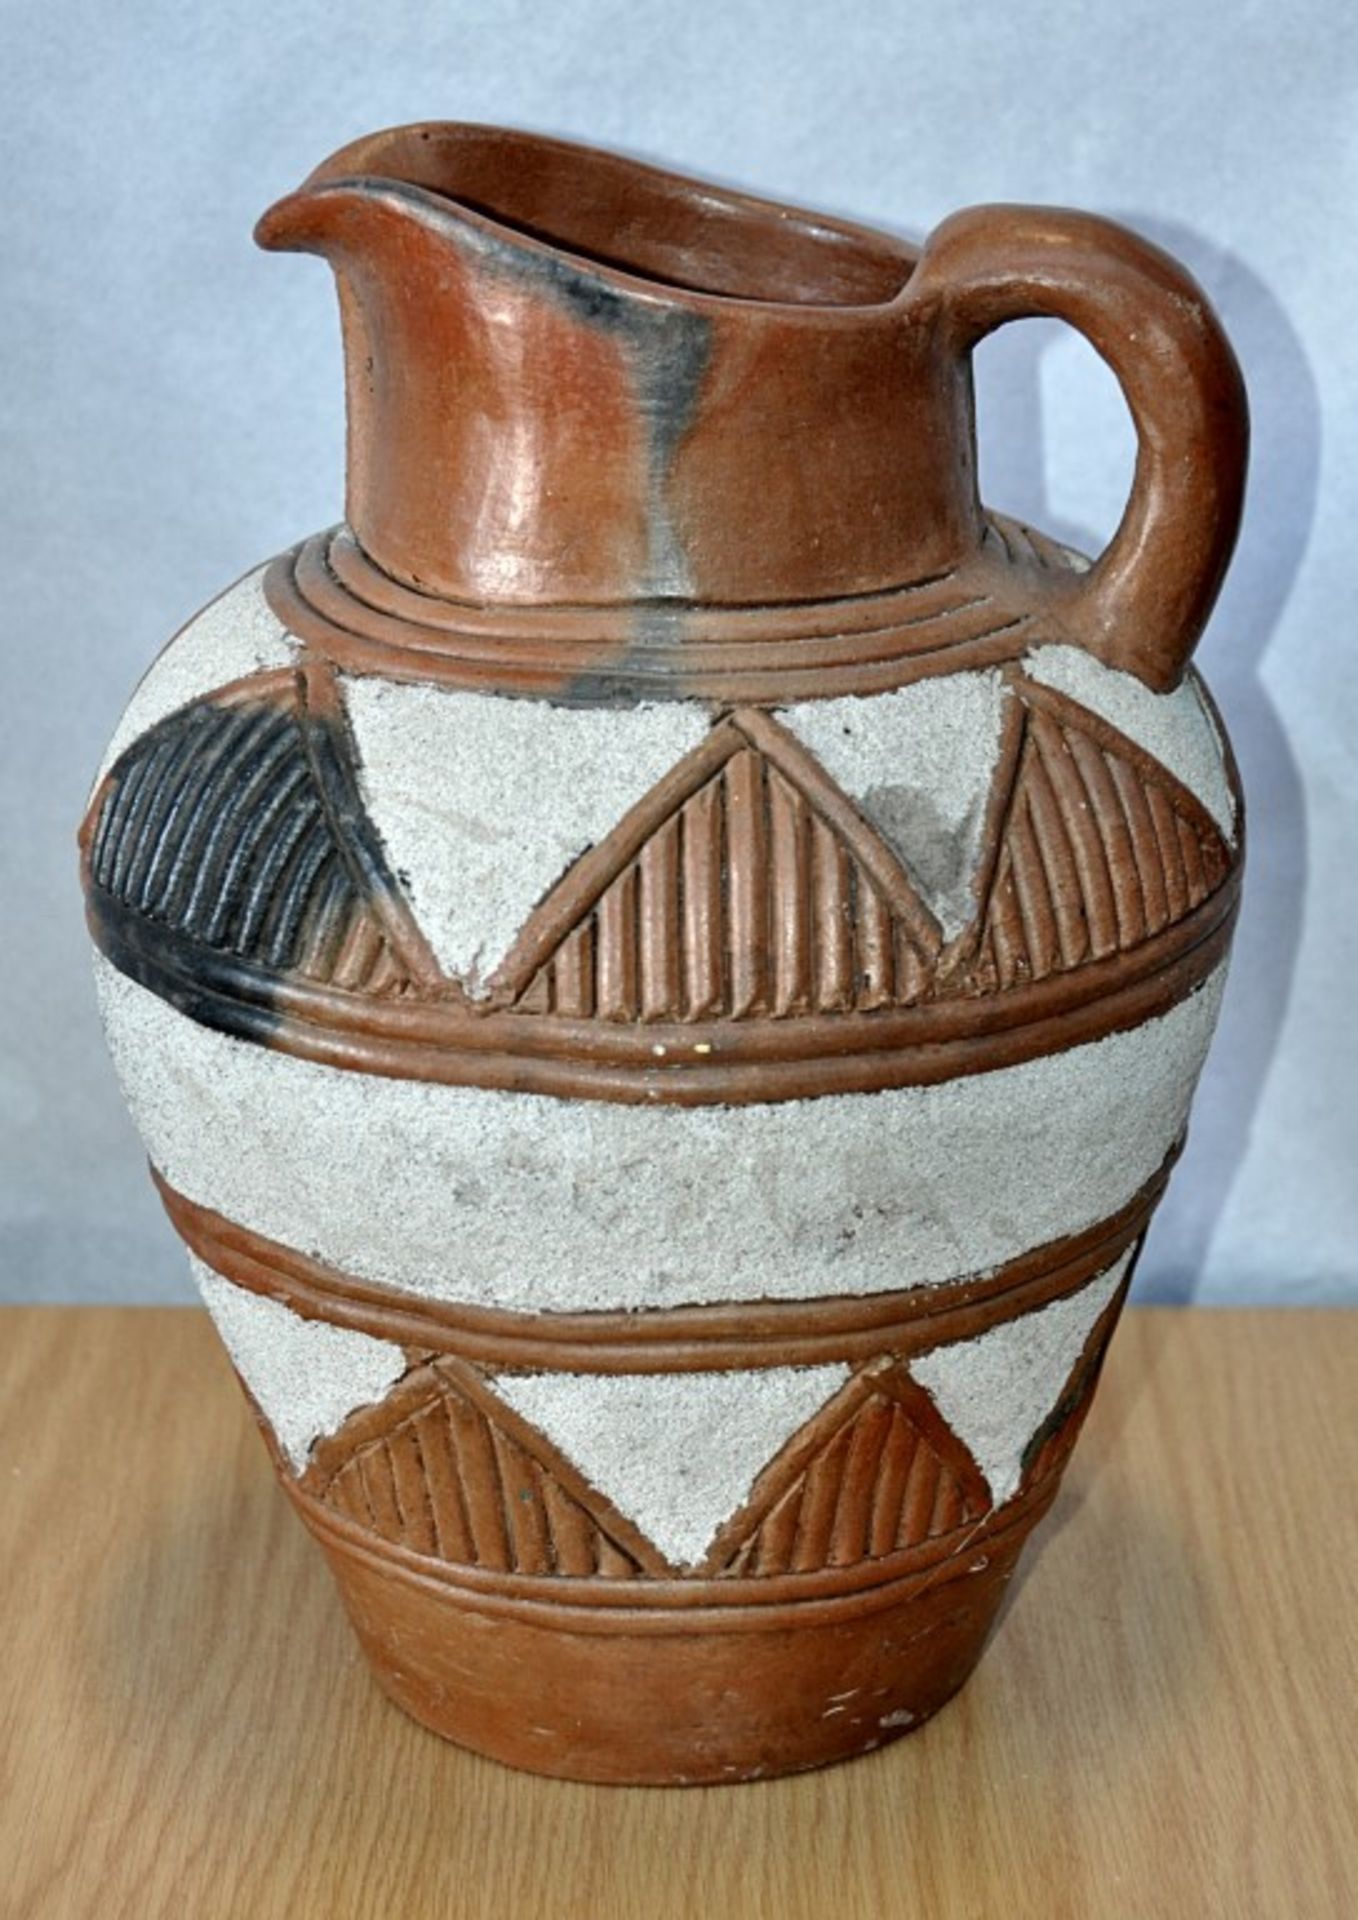 1 x Earthenware Ceramic Water Jug – Pre-owned, Great Condition With No Damage Or Major Wear - - Image 2 of 3